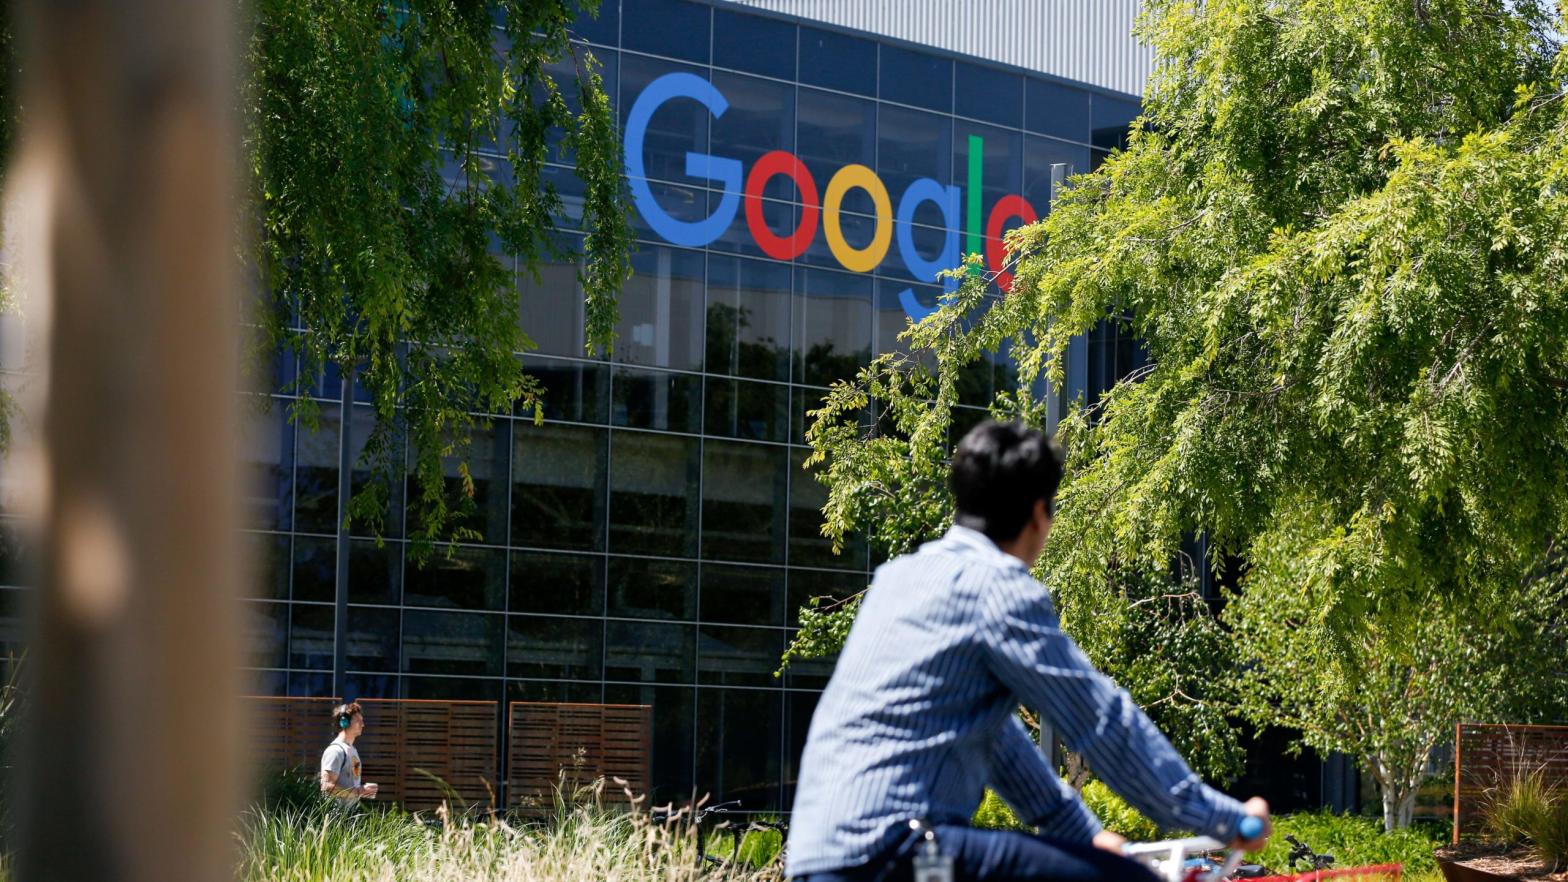 File photo of Google's campus in Mountain View, California. (Photo: Amy Osborne, Getty Images)